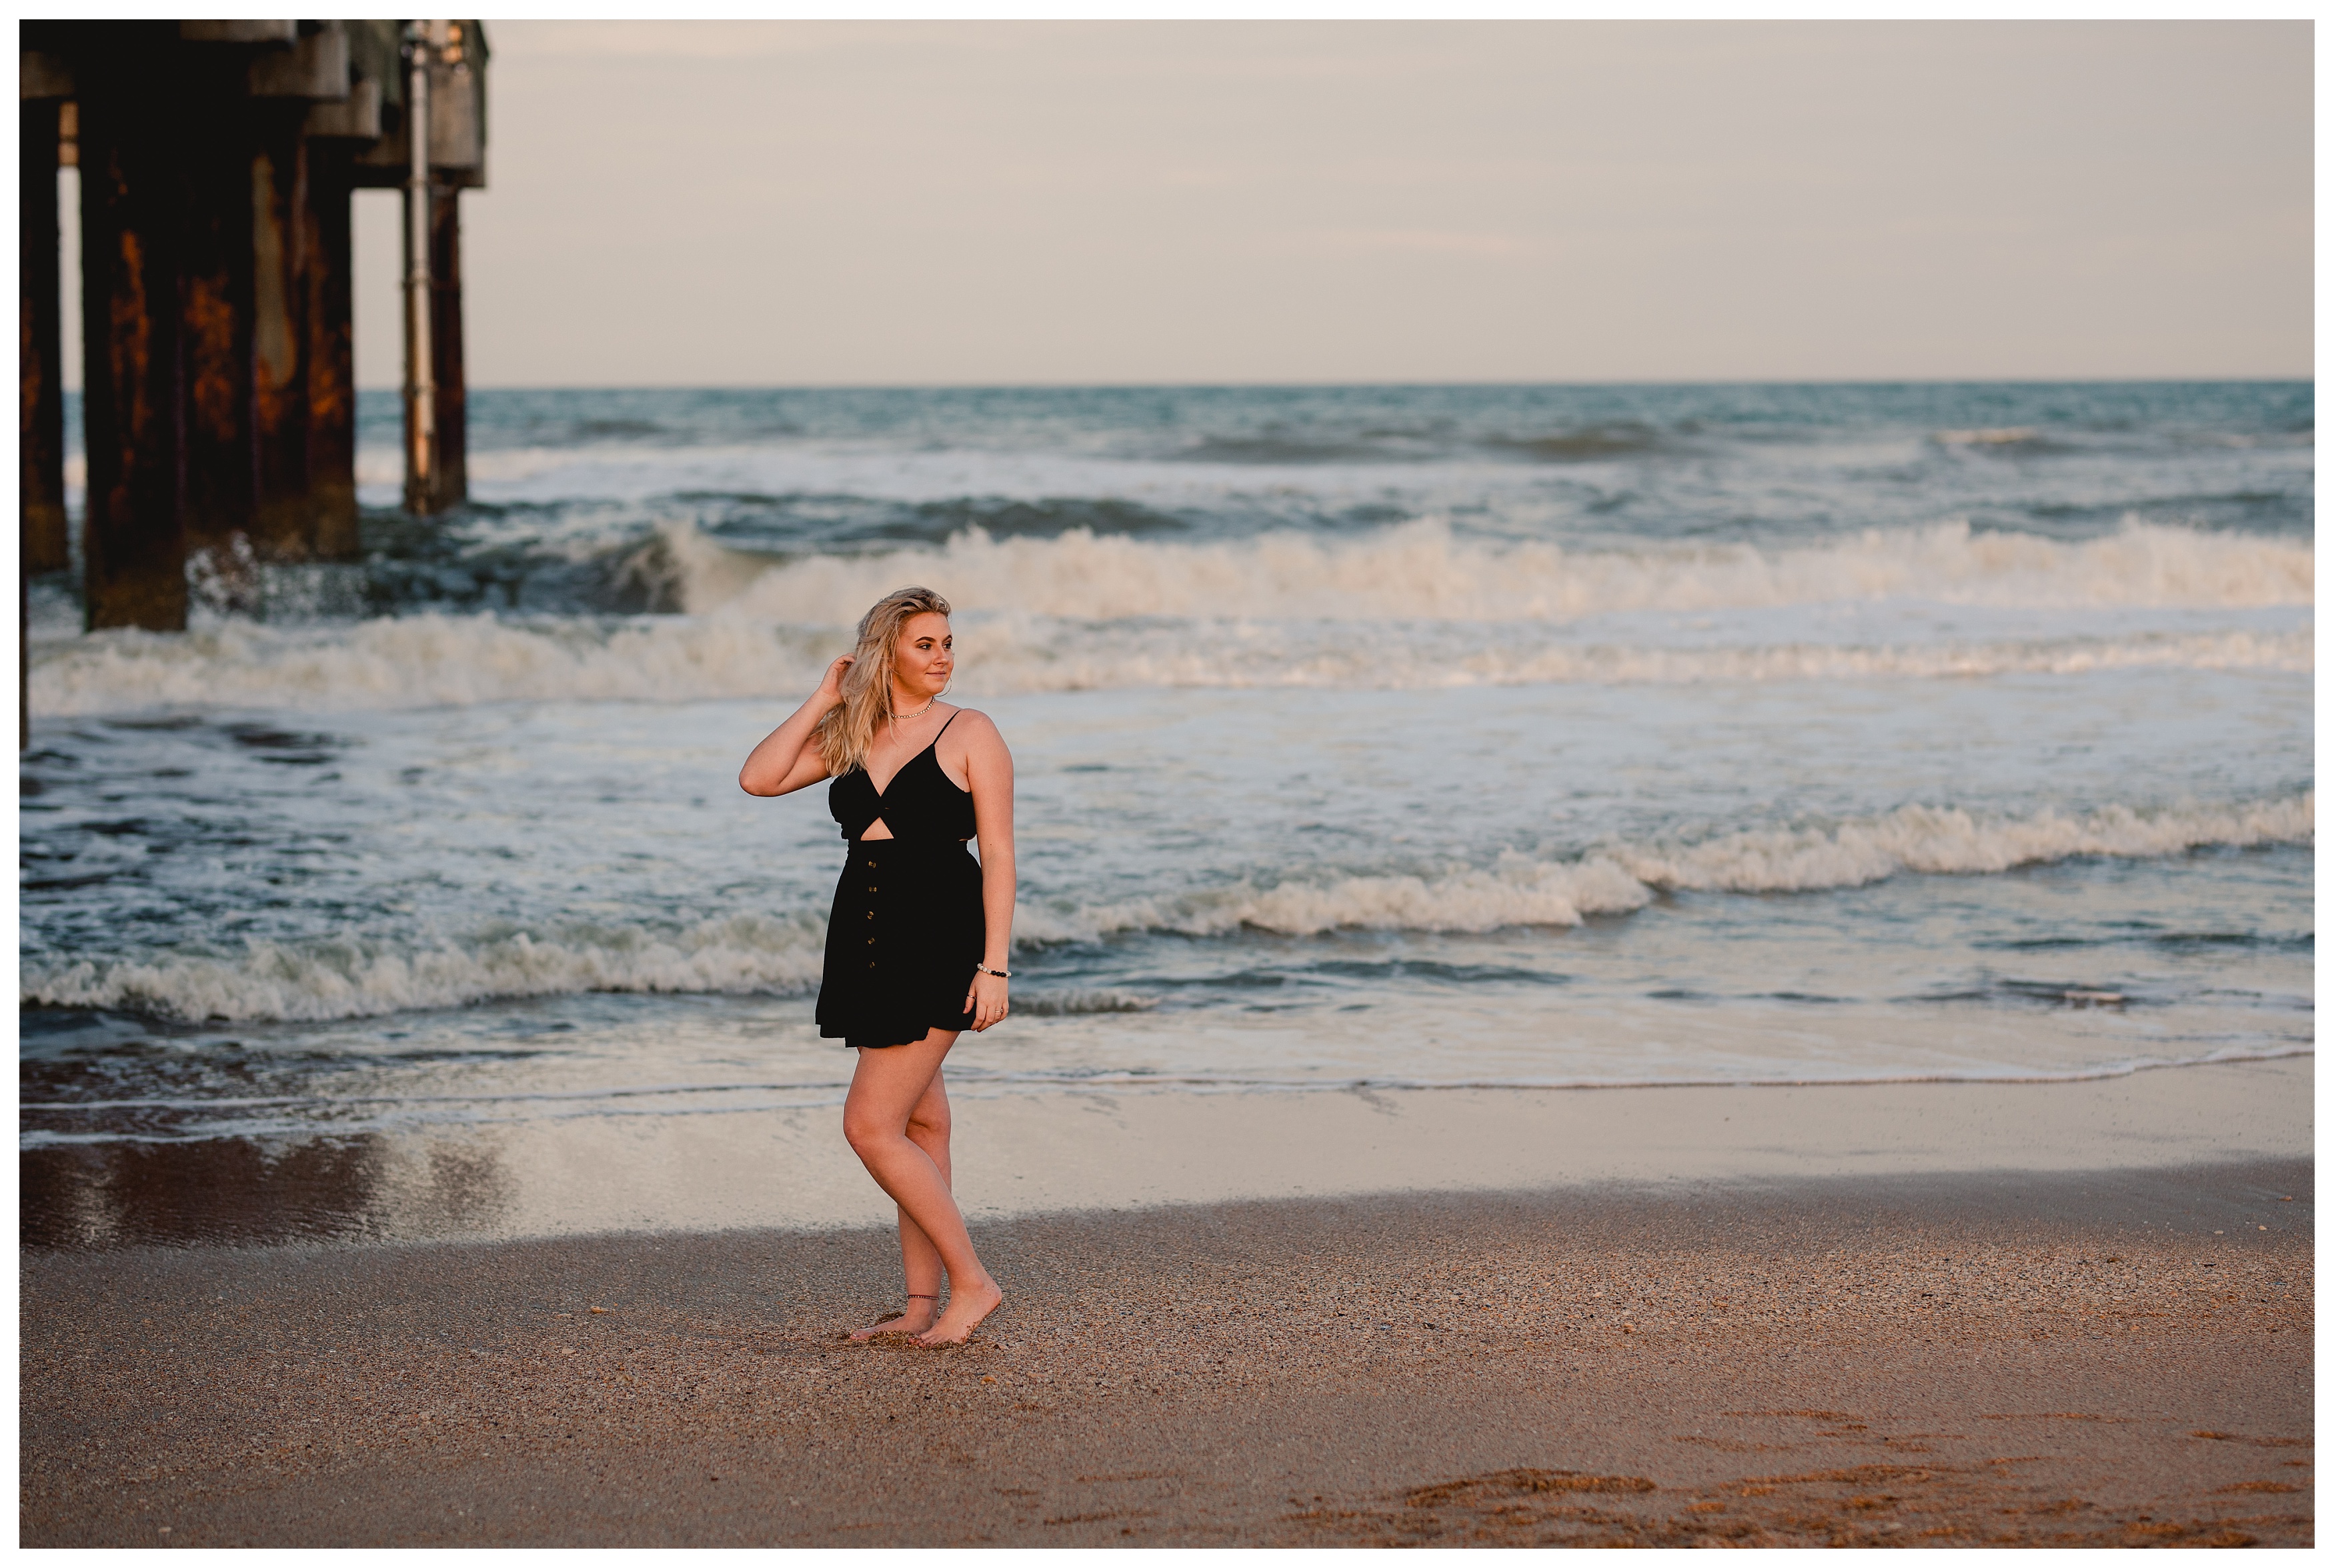 Beach senior photography session in St. Augustine, Florida. Shelly Williams Photography